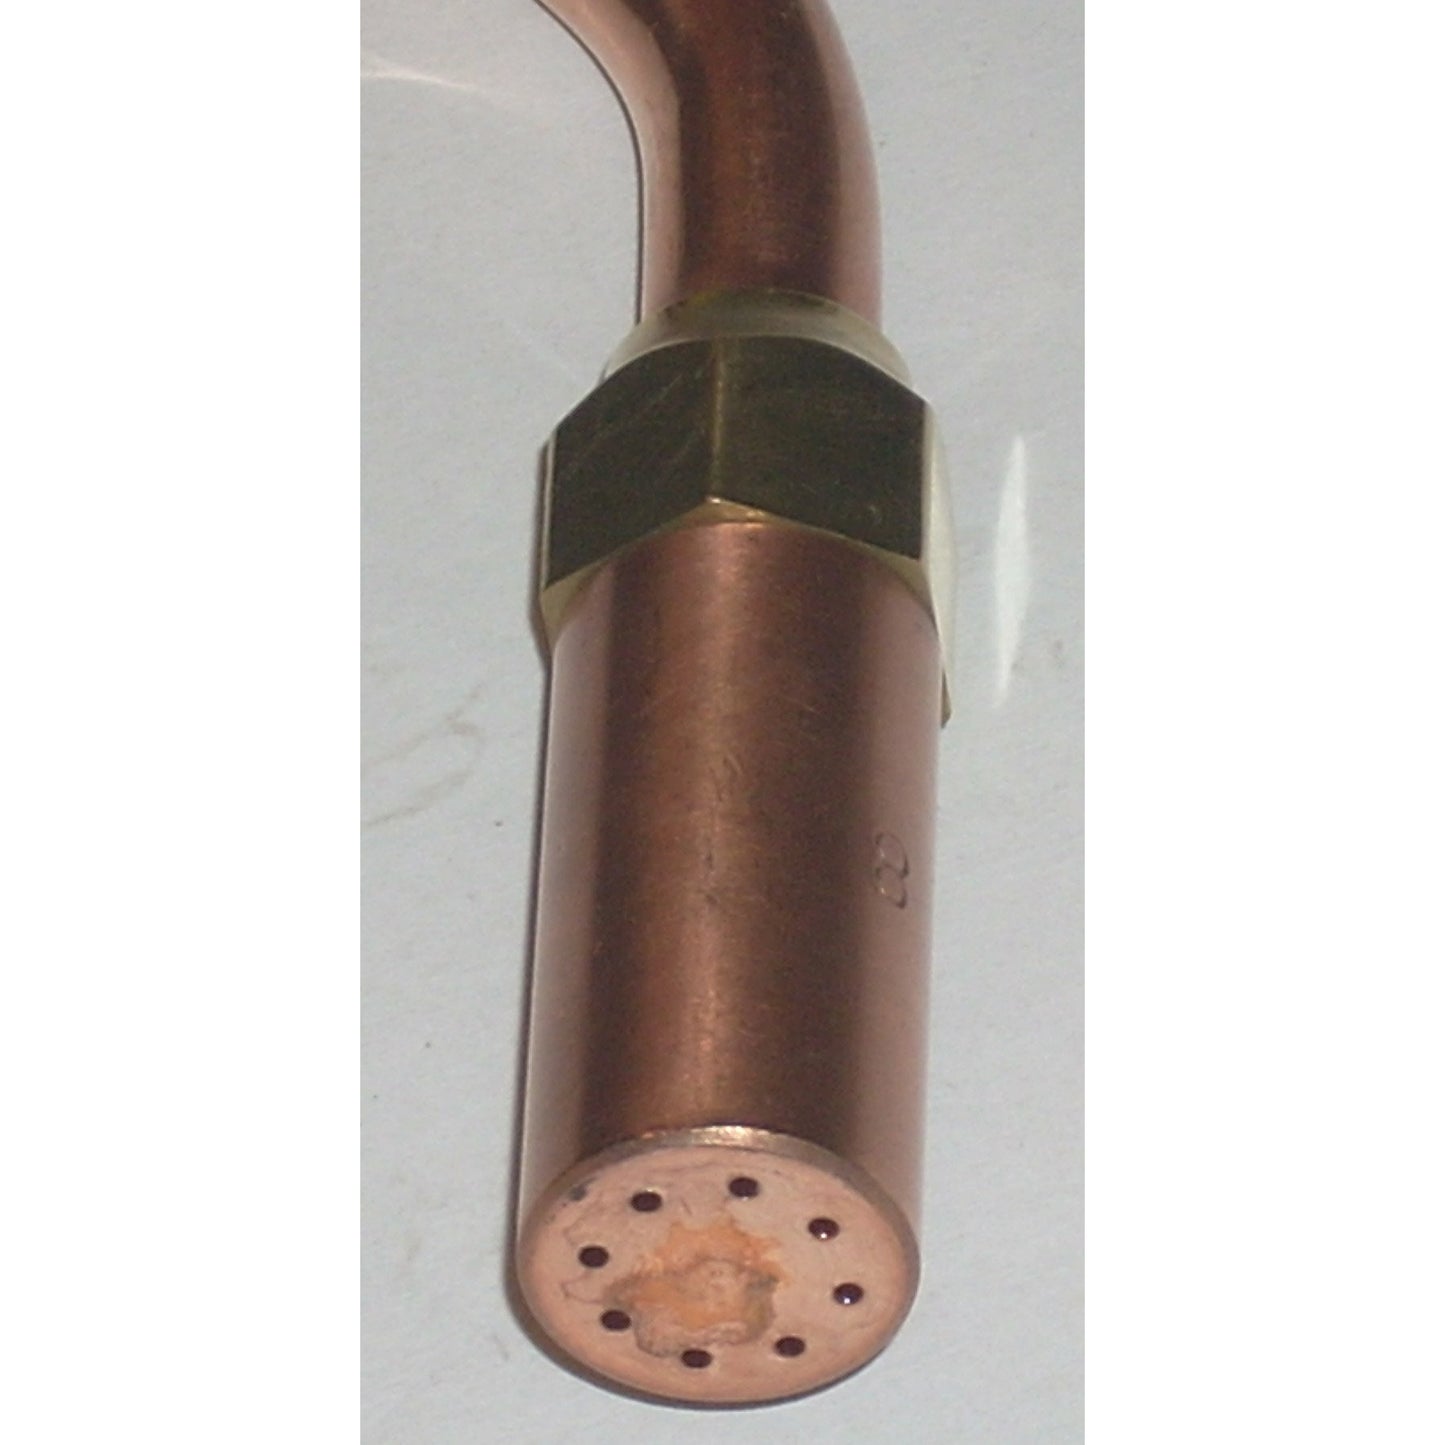 Victor style 8-MFN-1 Heating Tip Rosebud LP, Propane or Natural Gas - ATL Welding Supply